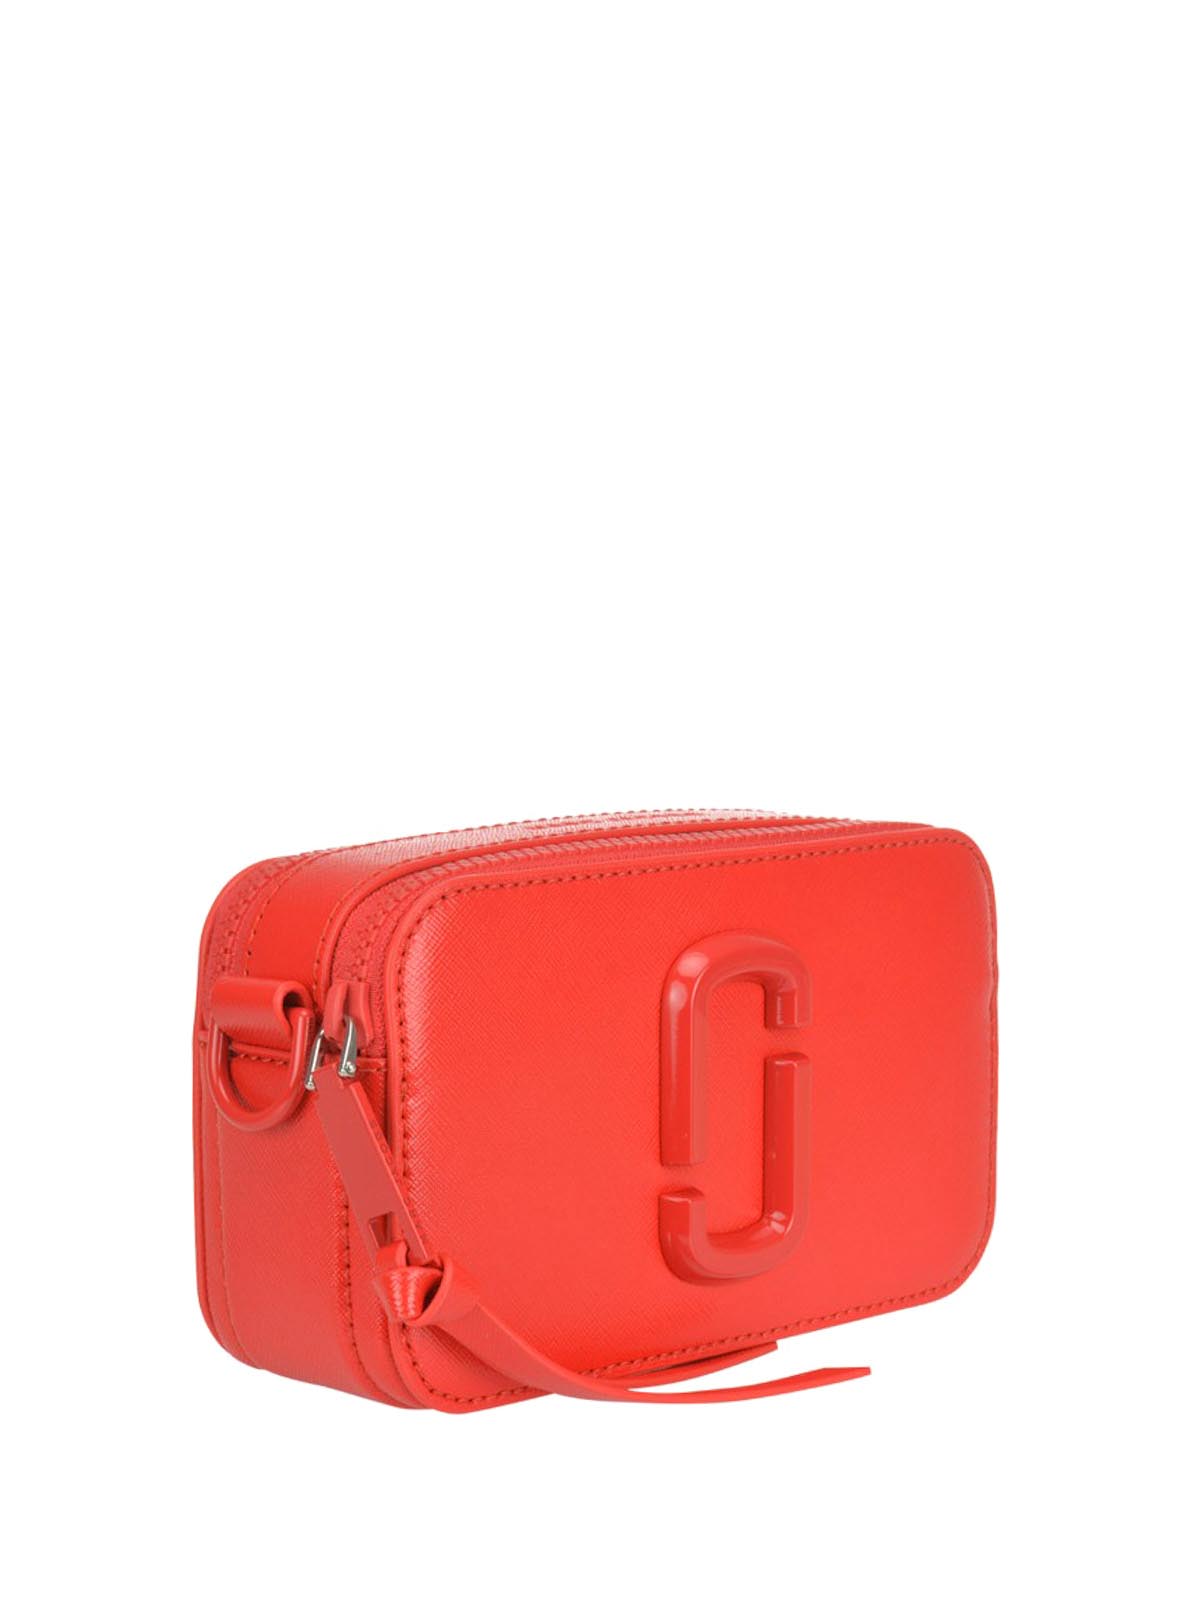 Marc Jacobs Snapshot Dtm Bag In Red Leather